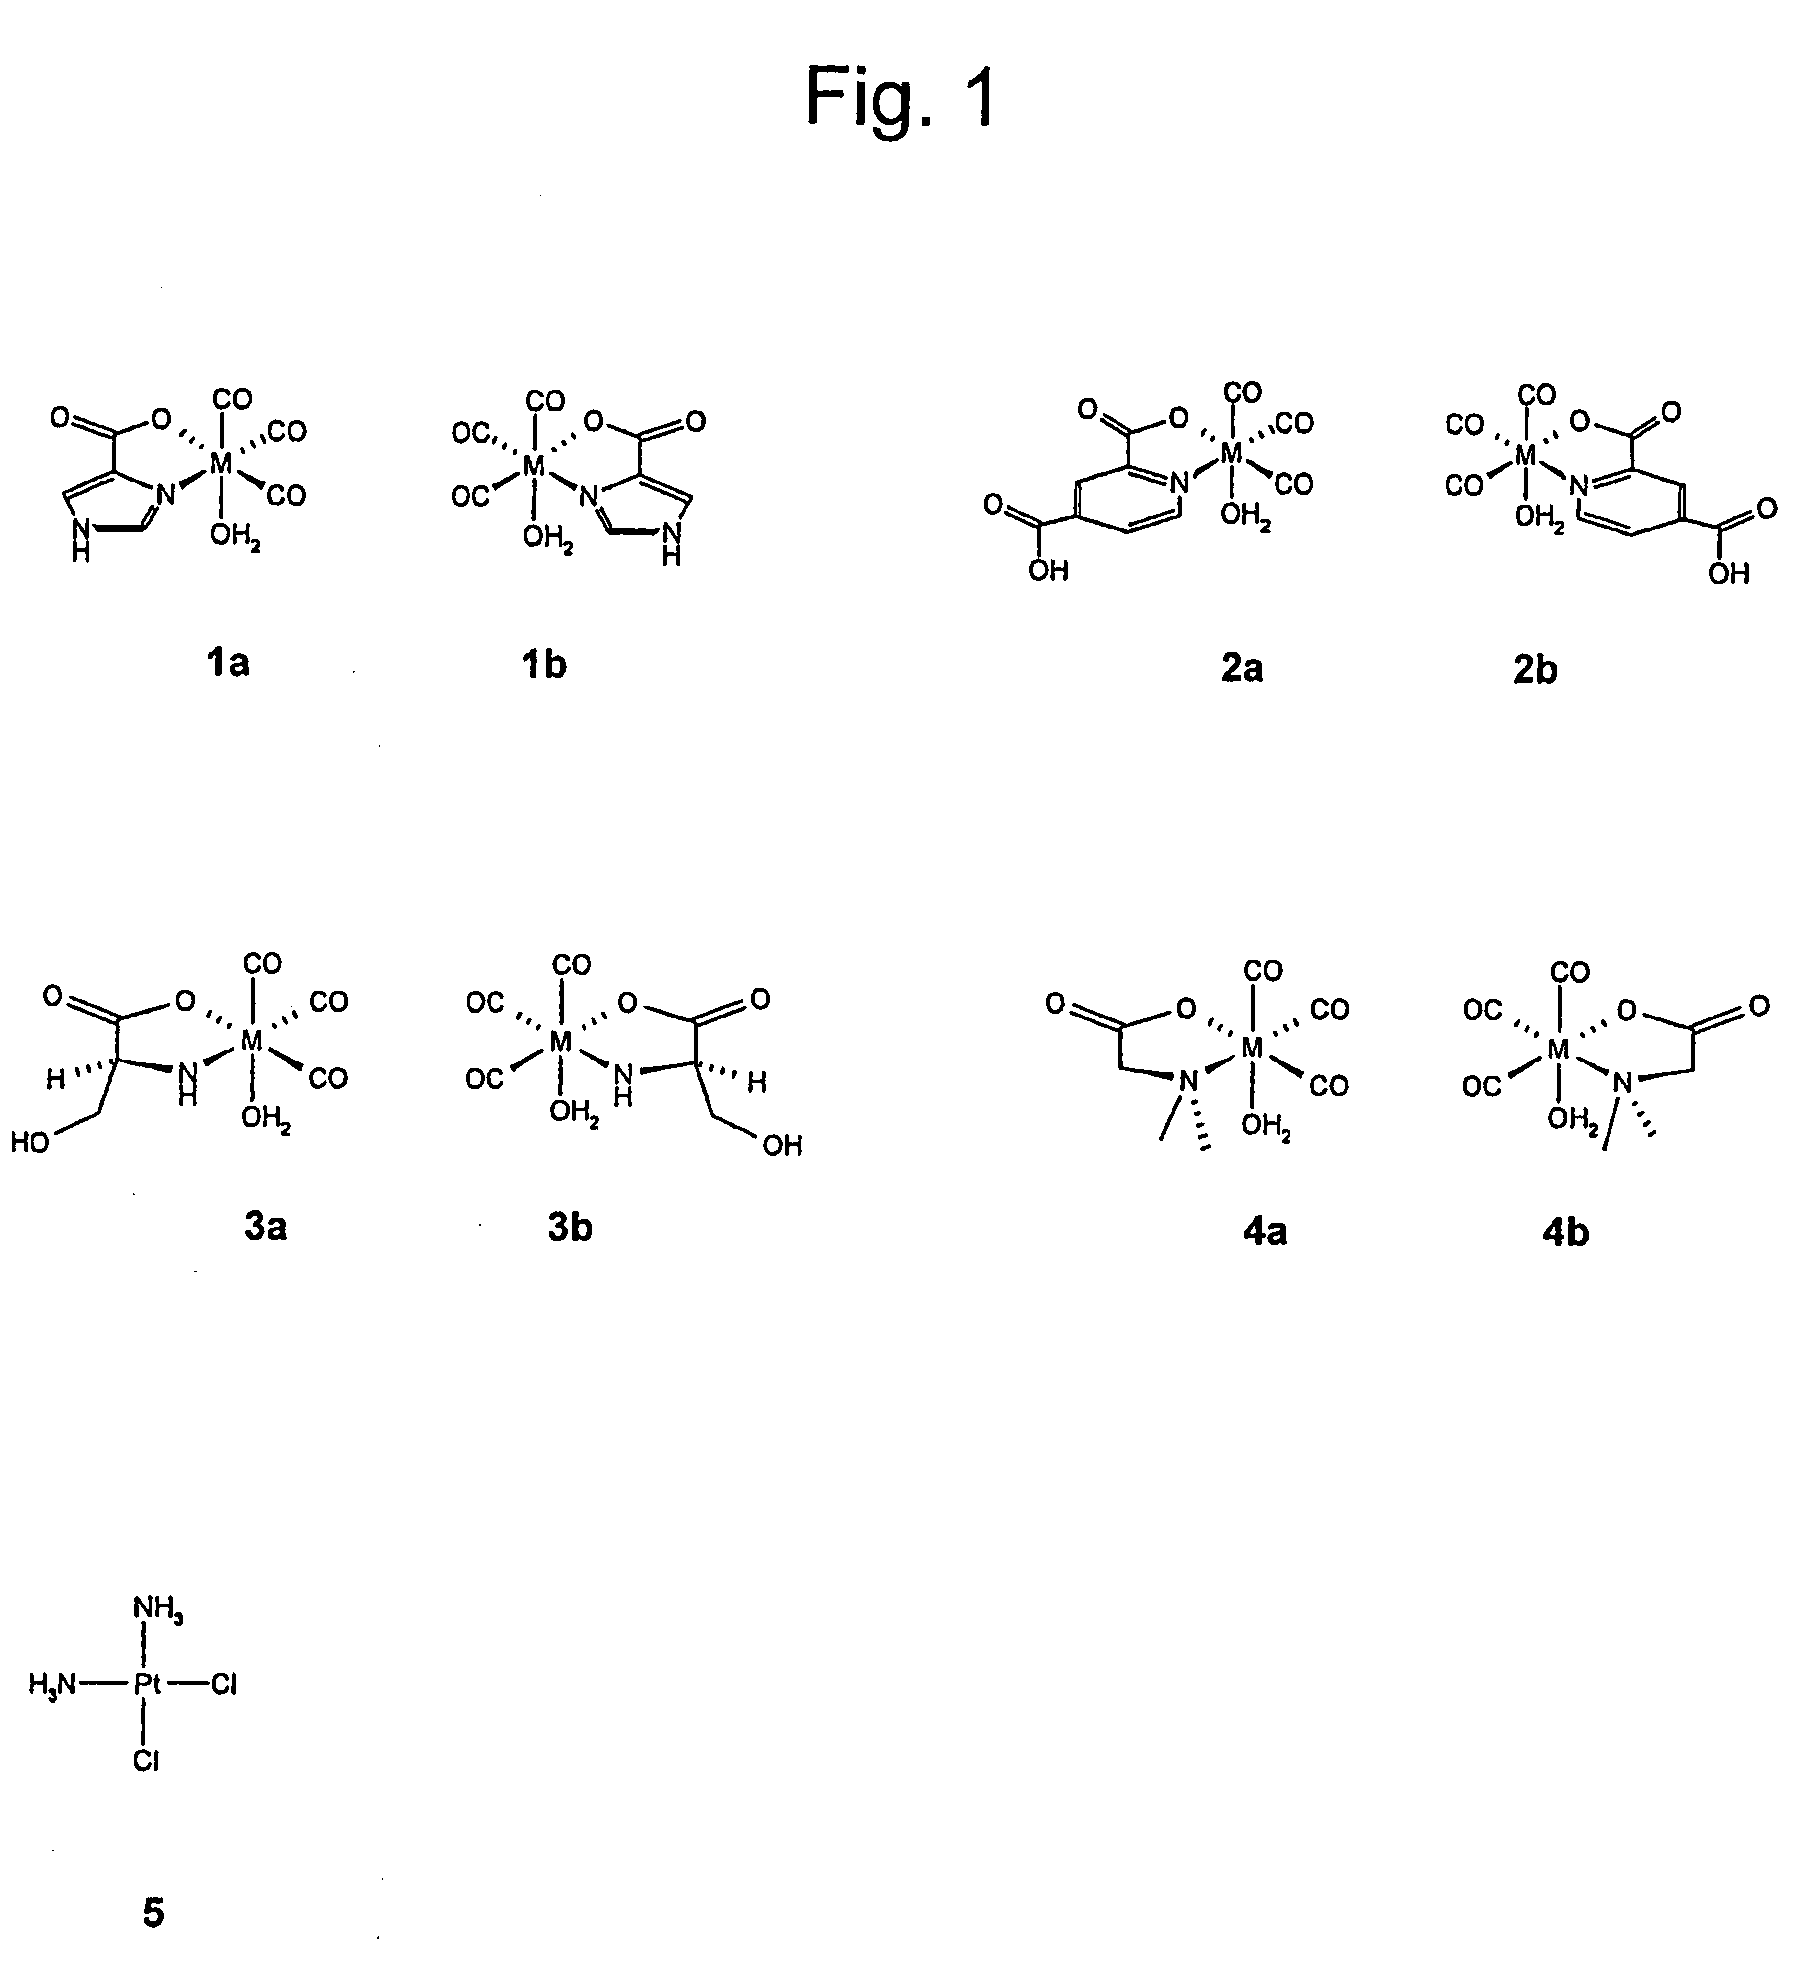 Metal complexes having vitamin b12 as a ligand